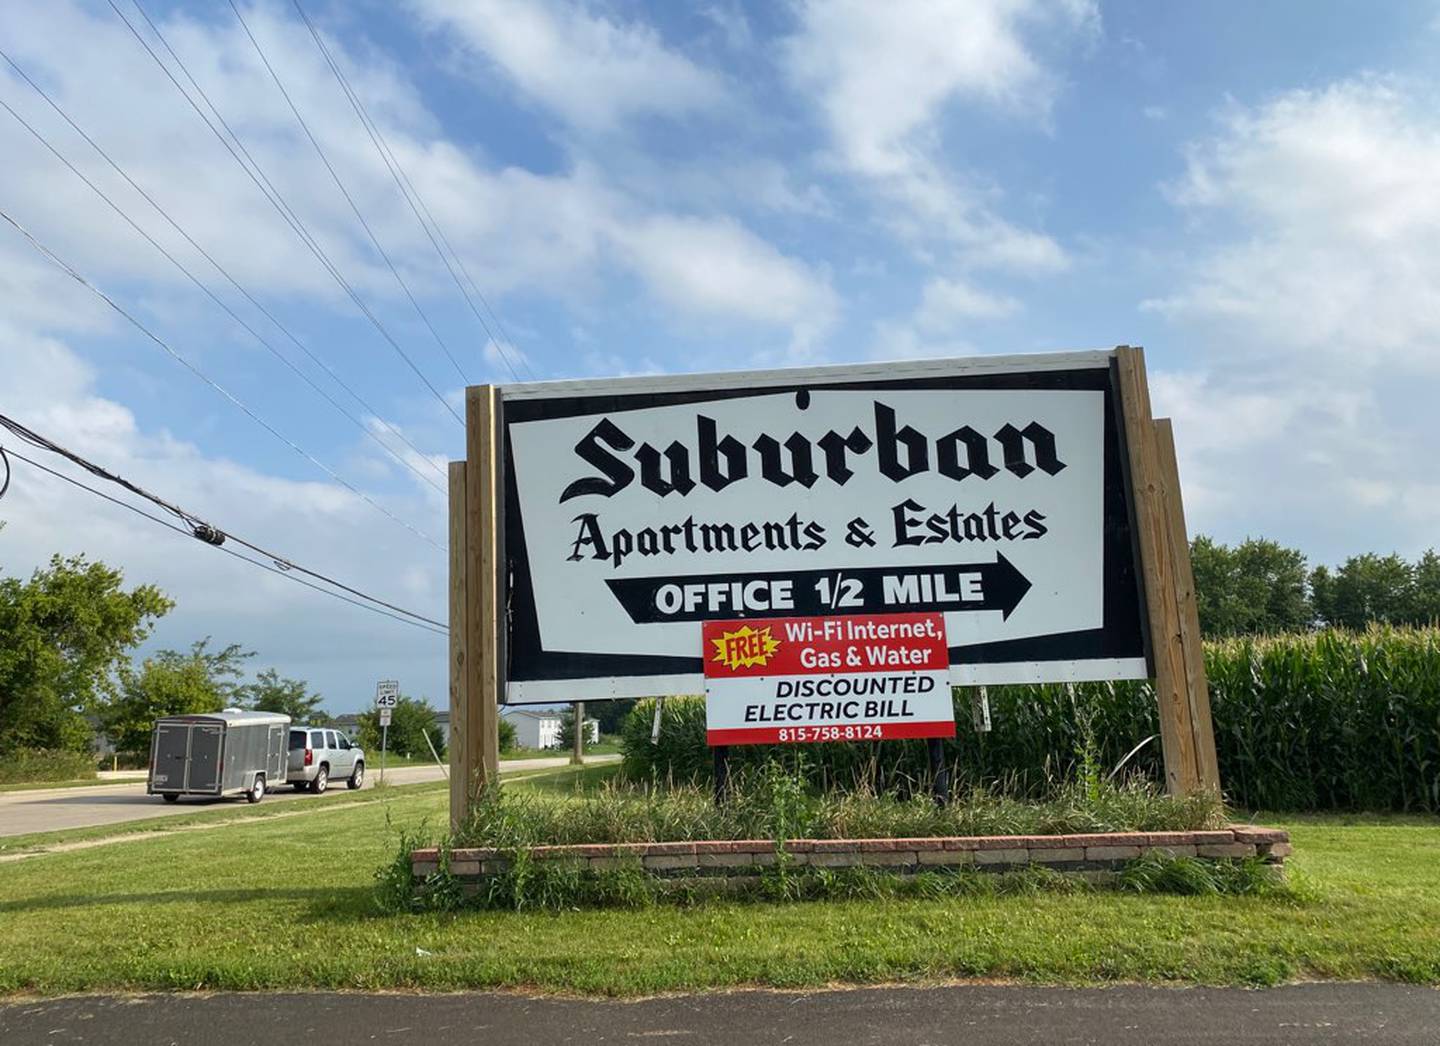 Chicago-based developer Clear Investment Group LLC has offered $30 million to buy private rental communities Suburban Estates and Suburban Apartments on North Annie Glidden and Twombly Roads in unincorporated DeKalb County.  The 80-acre site would be annexed to the City of DeKalb as part of a proposed new government agreement with the city, DeKalb County government and Clear Investment, according to city documents released Thursday, August 4, 2022.